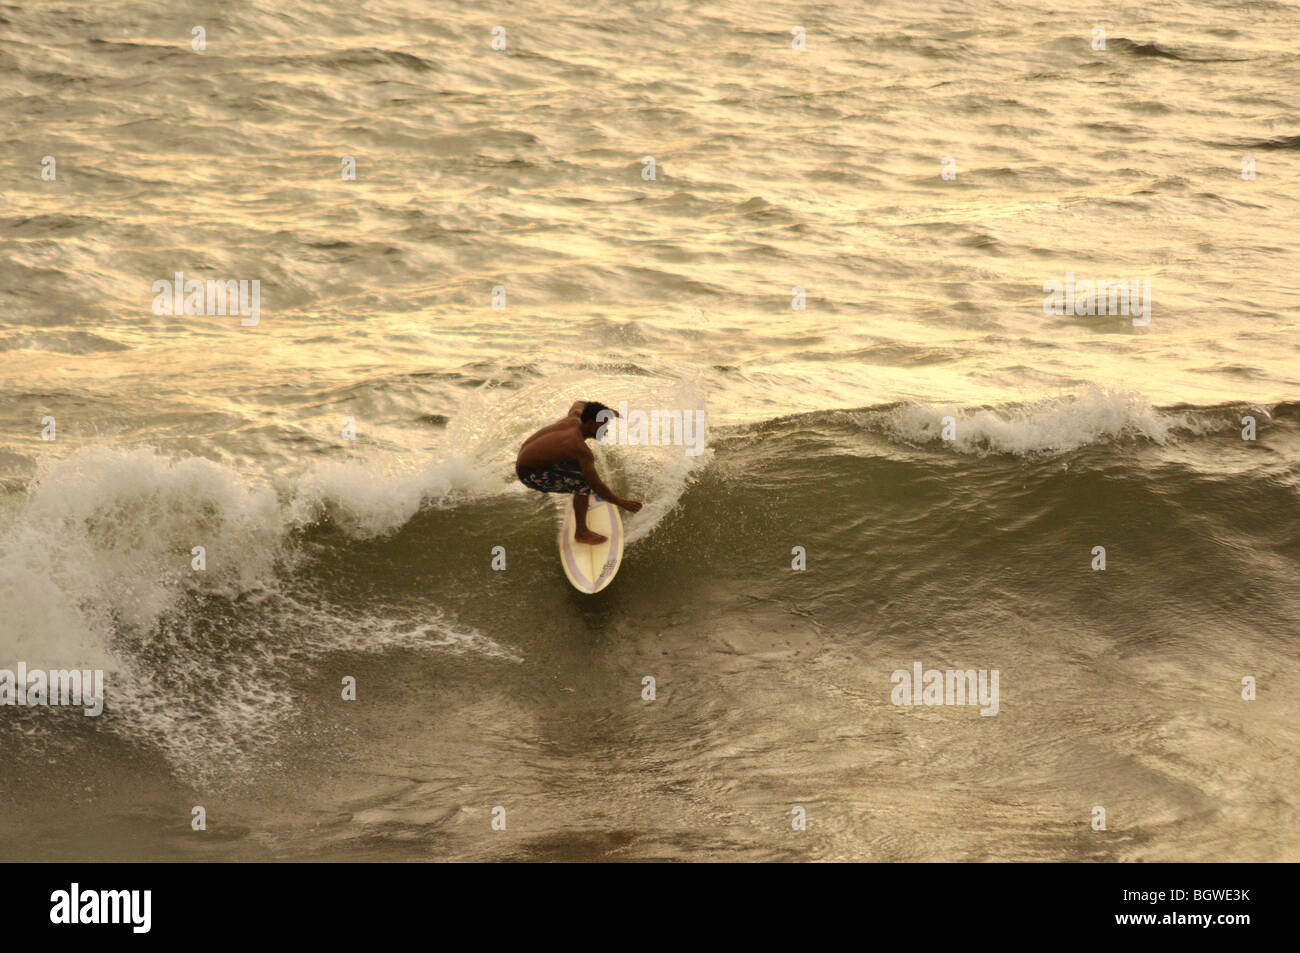 Surfing is a popular sport in Bali Island Stock Photo